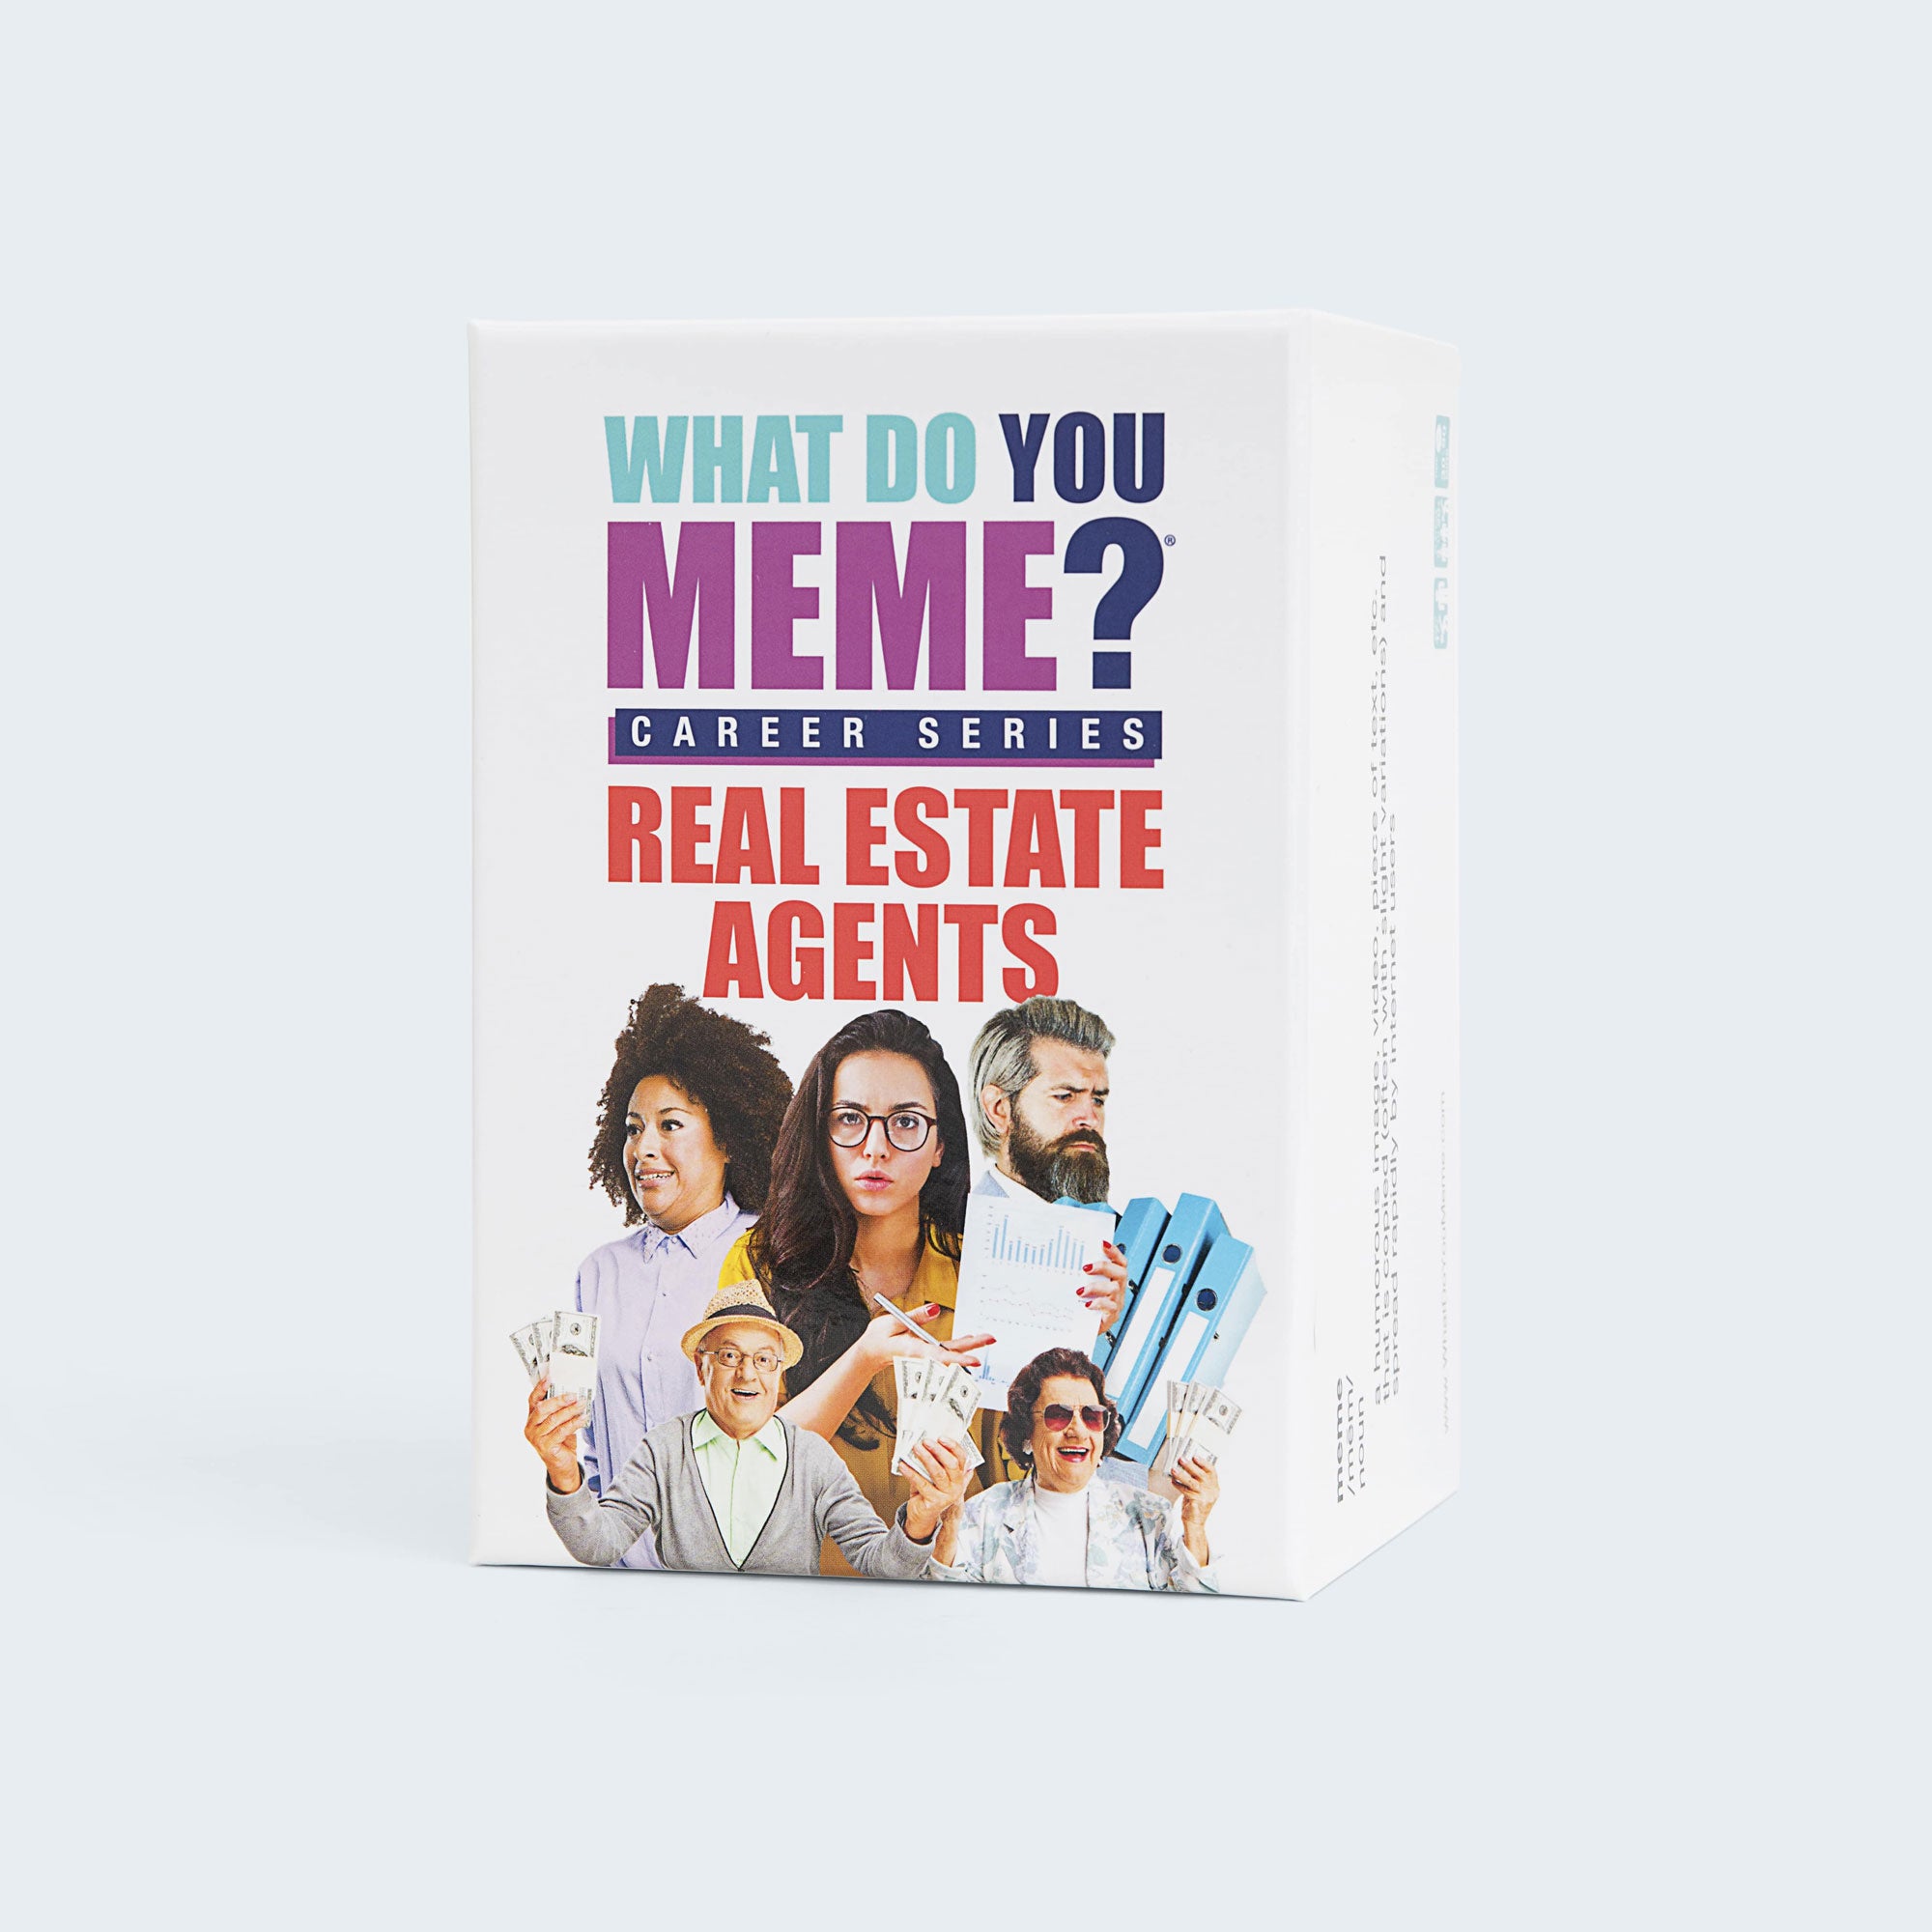 what-do-you-meme-career-series-real-estate-agents-game-box-and-game-play-03-what-do-you-meme-by-relatable